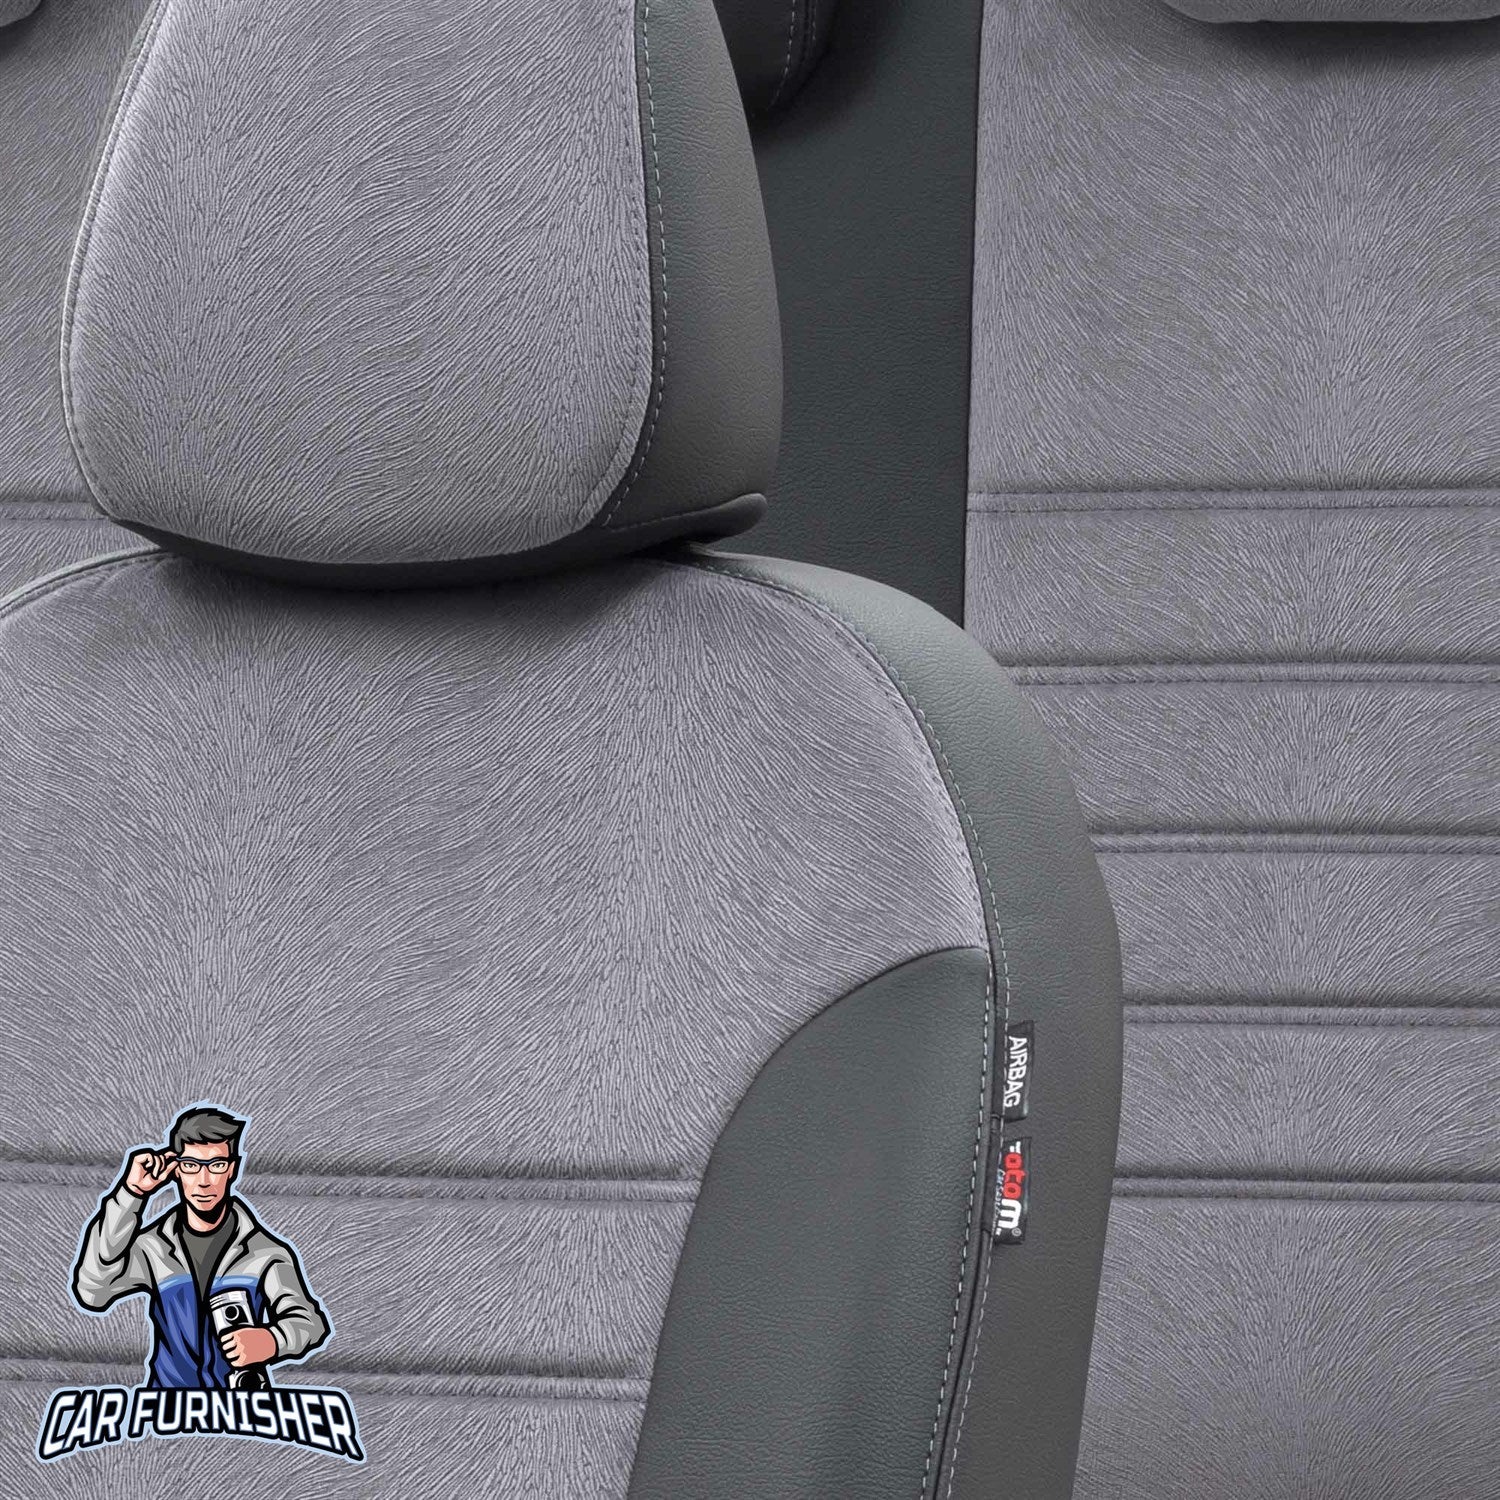 Volkswagen Caddy Seat Cover London Foal Feather Design Smoked Black Leather & Foal Feather